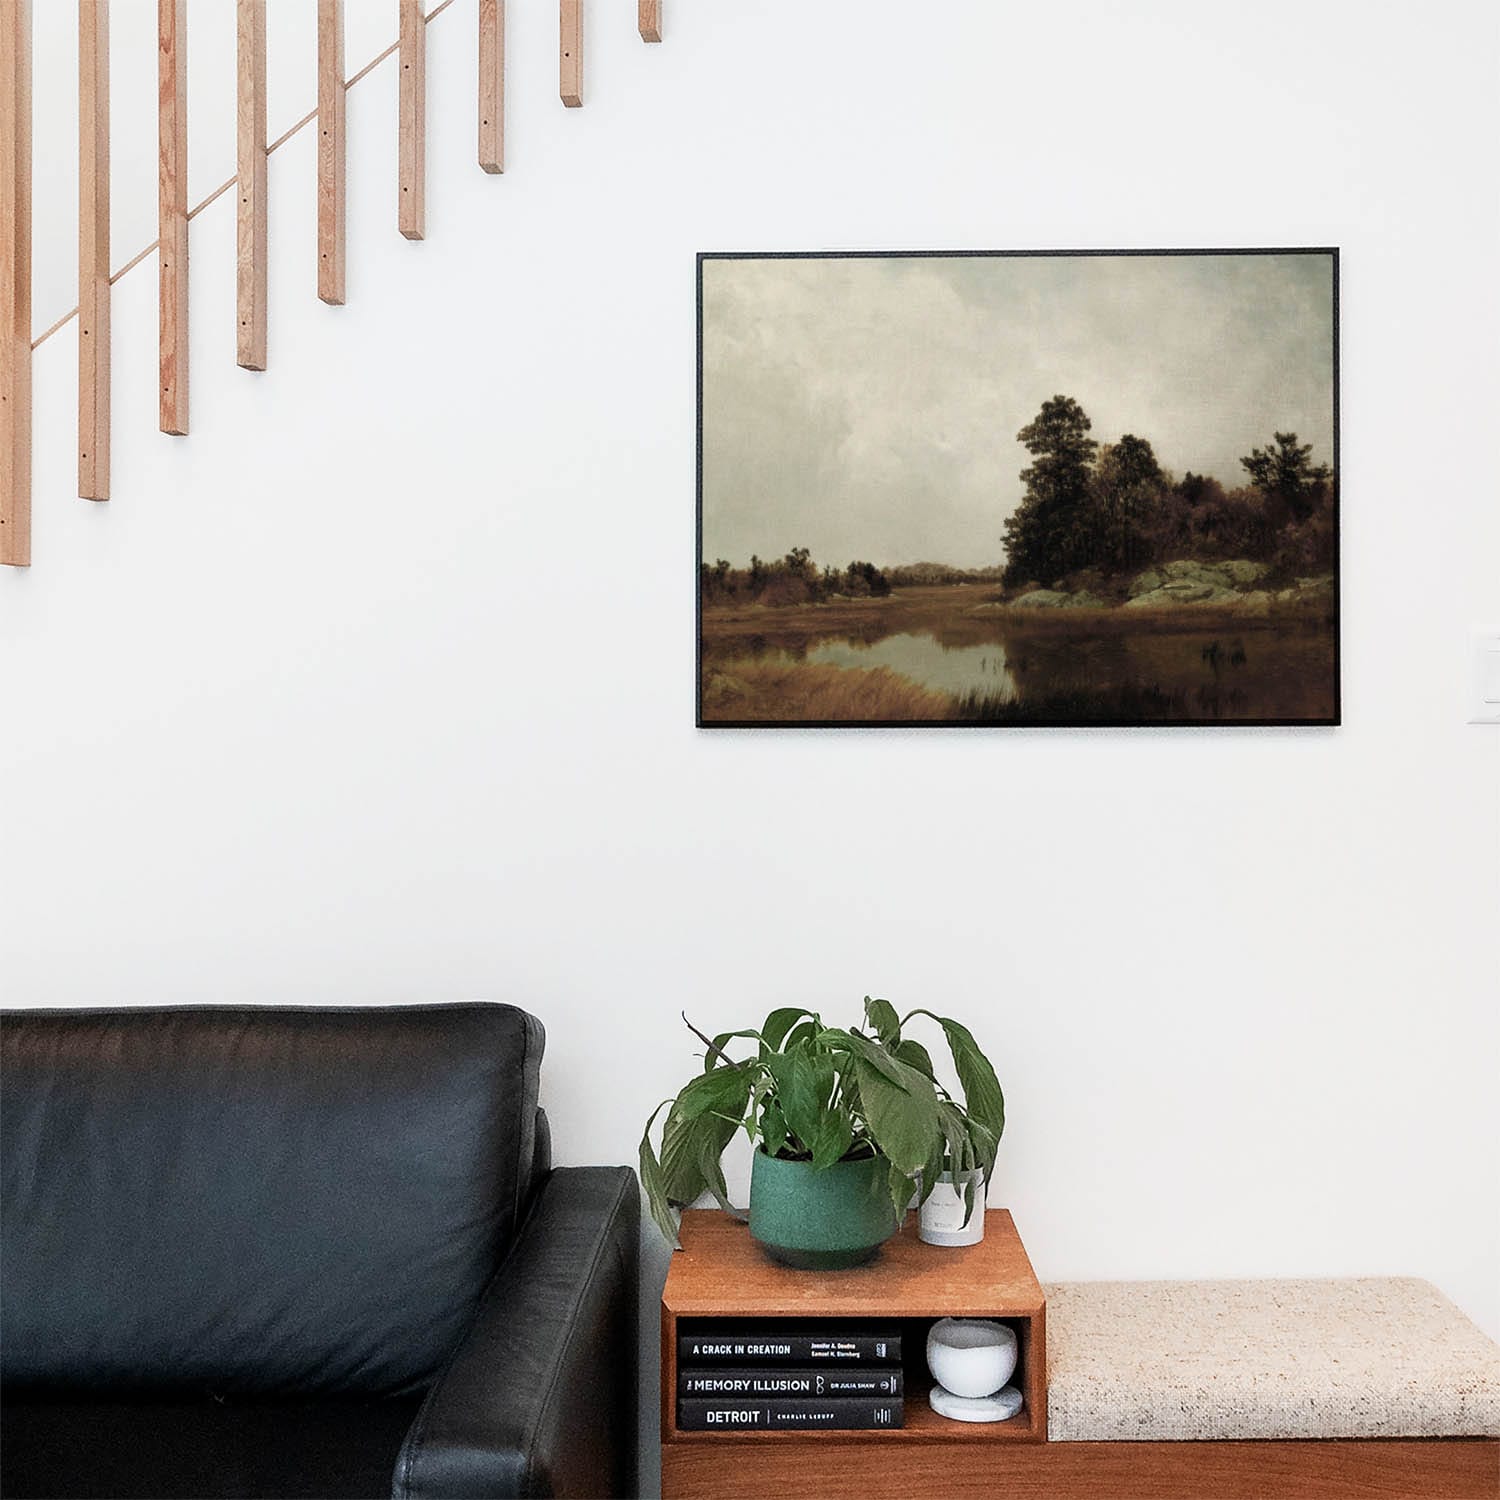 Autumn Wall Art Print in a Picture Frame on Living Room Wall